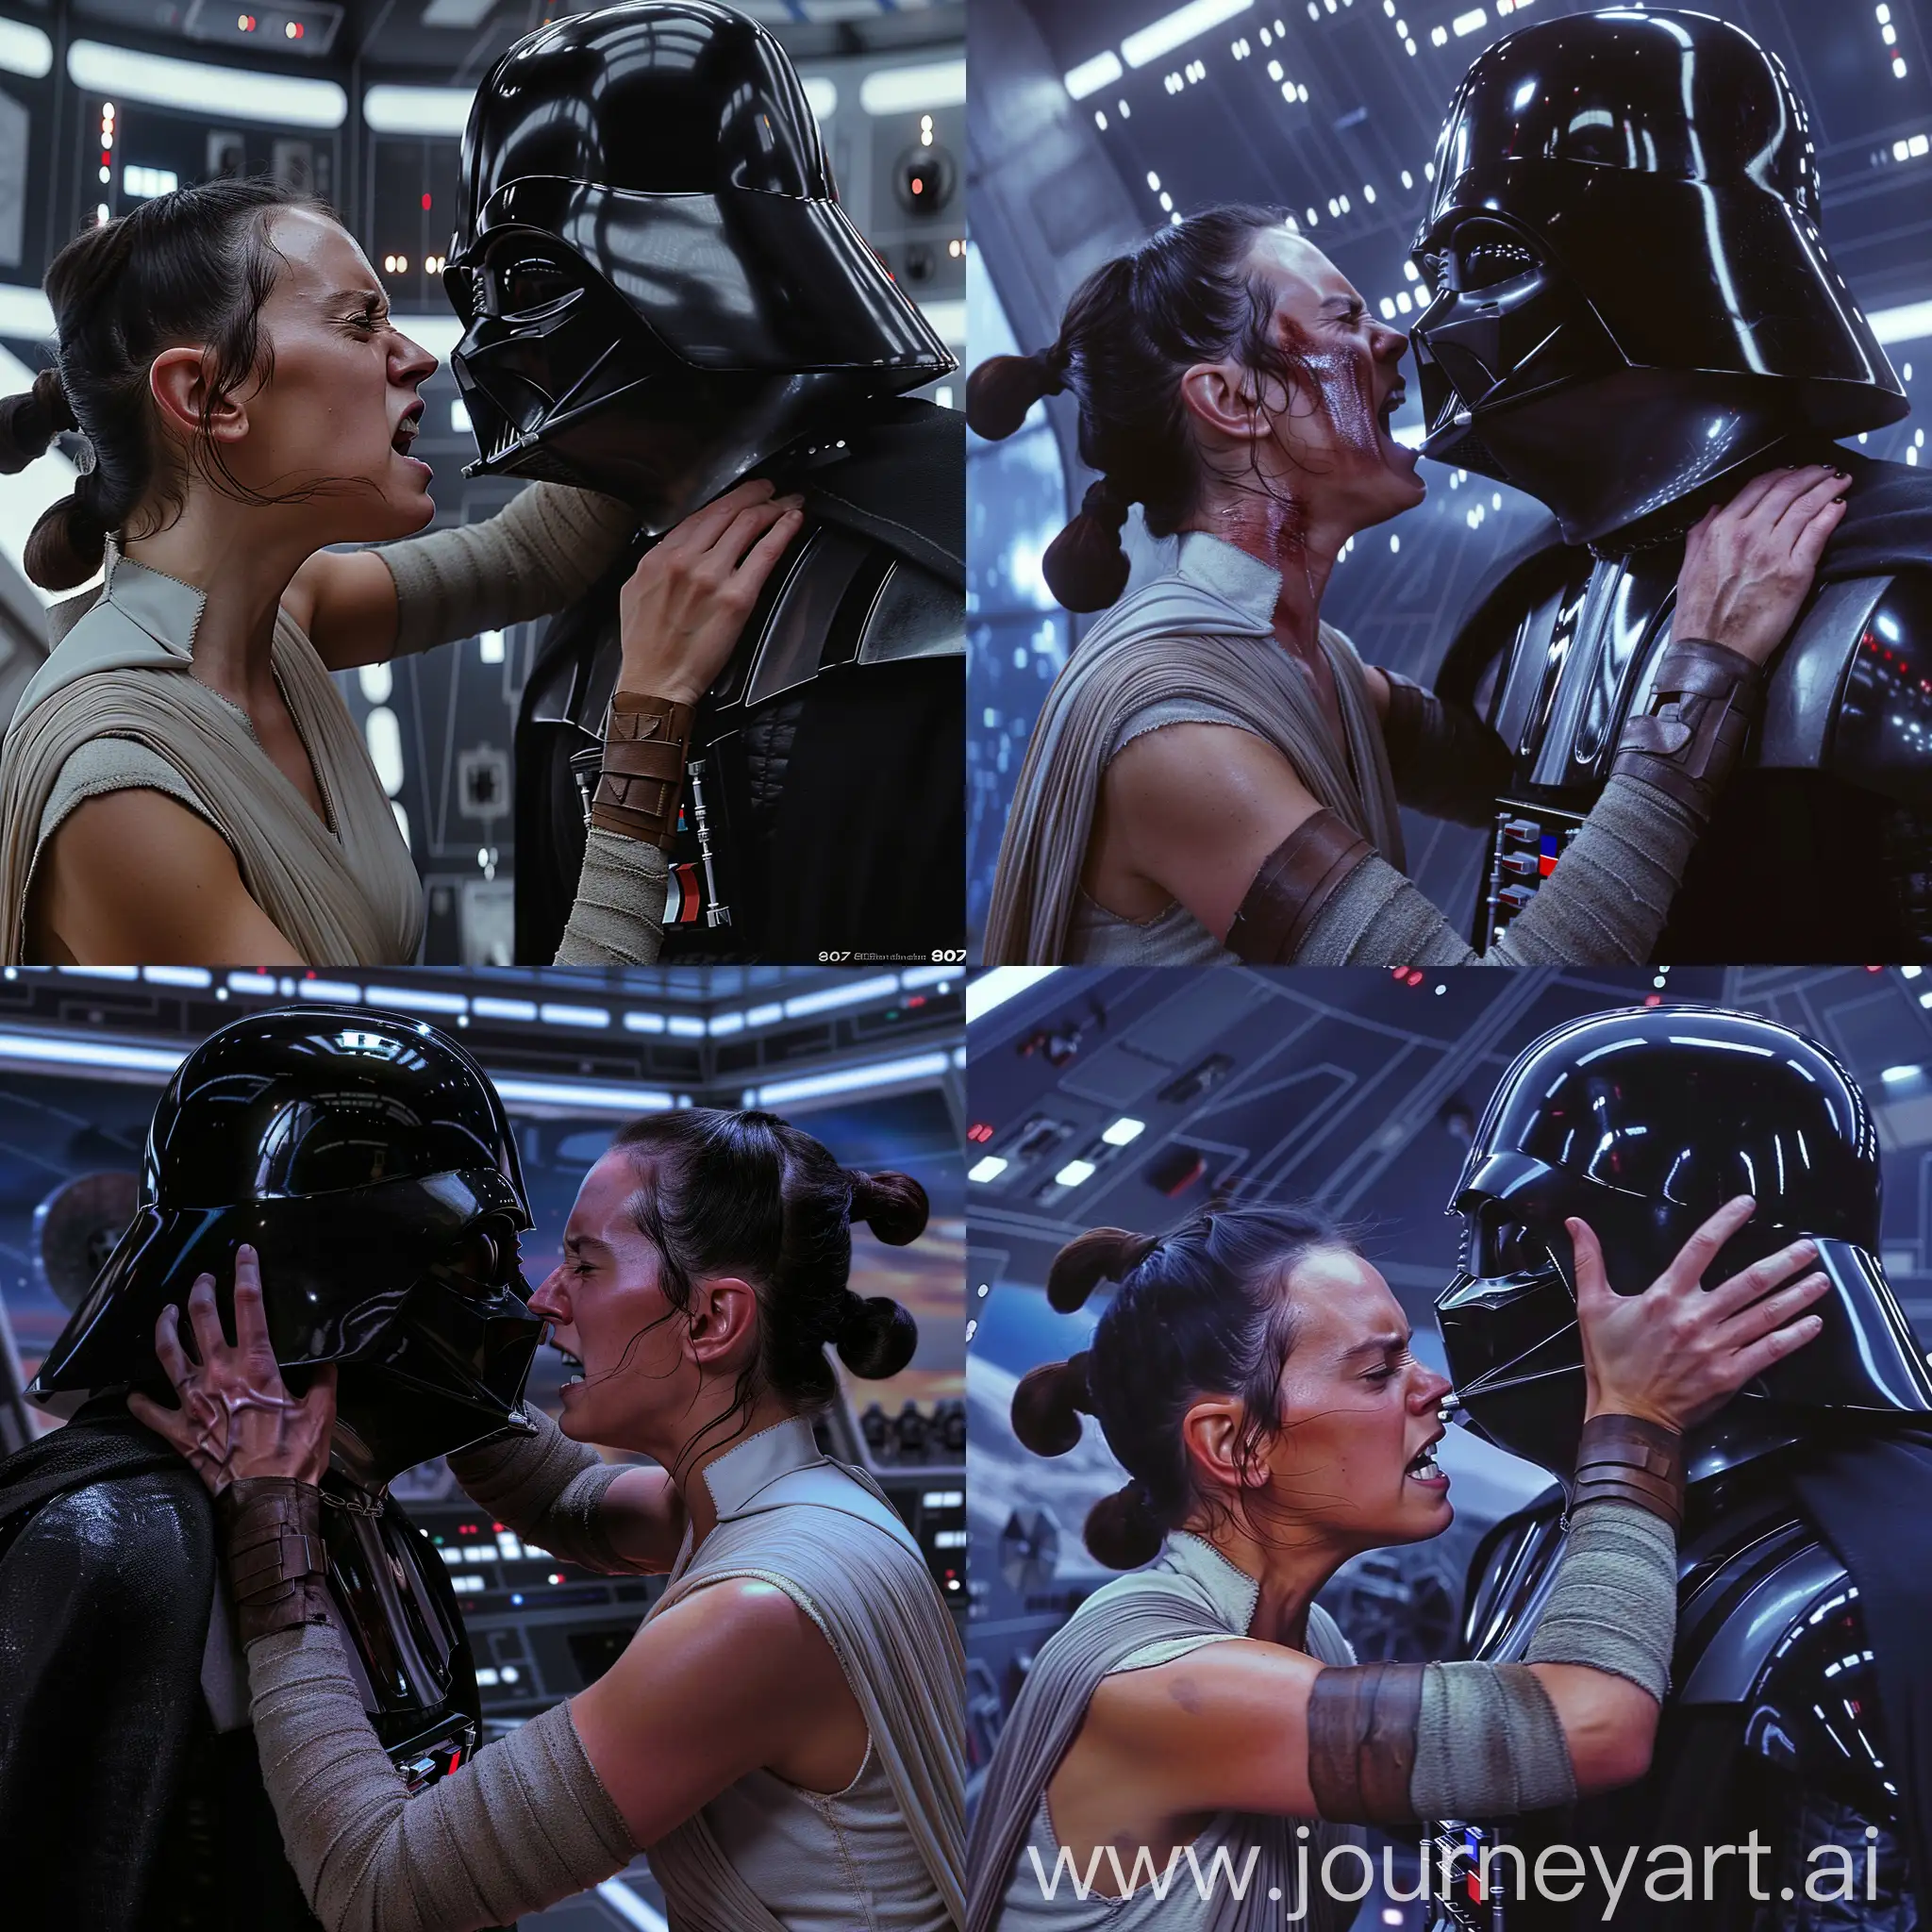 hyper-realistic images from the new Star Wars film, with Rey Skywalker very furious, facing Darh Vader face to face with her hand squeezing his neck, in Spaceship, 8k resolution